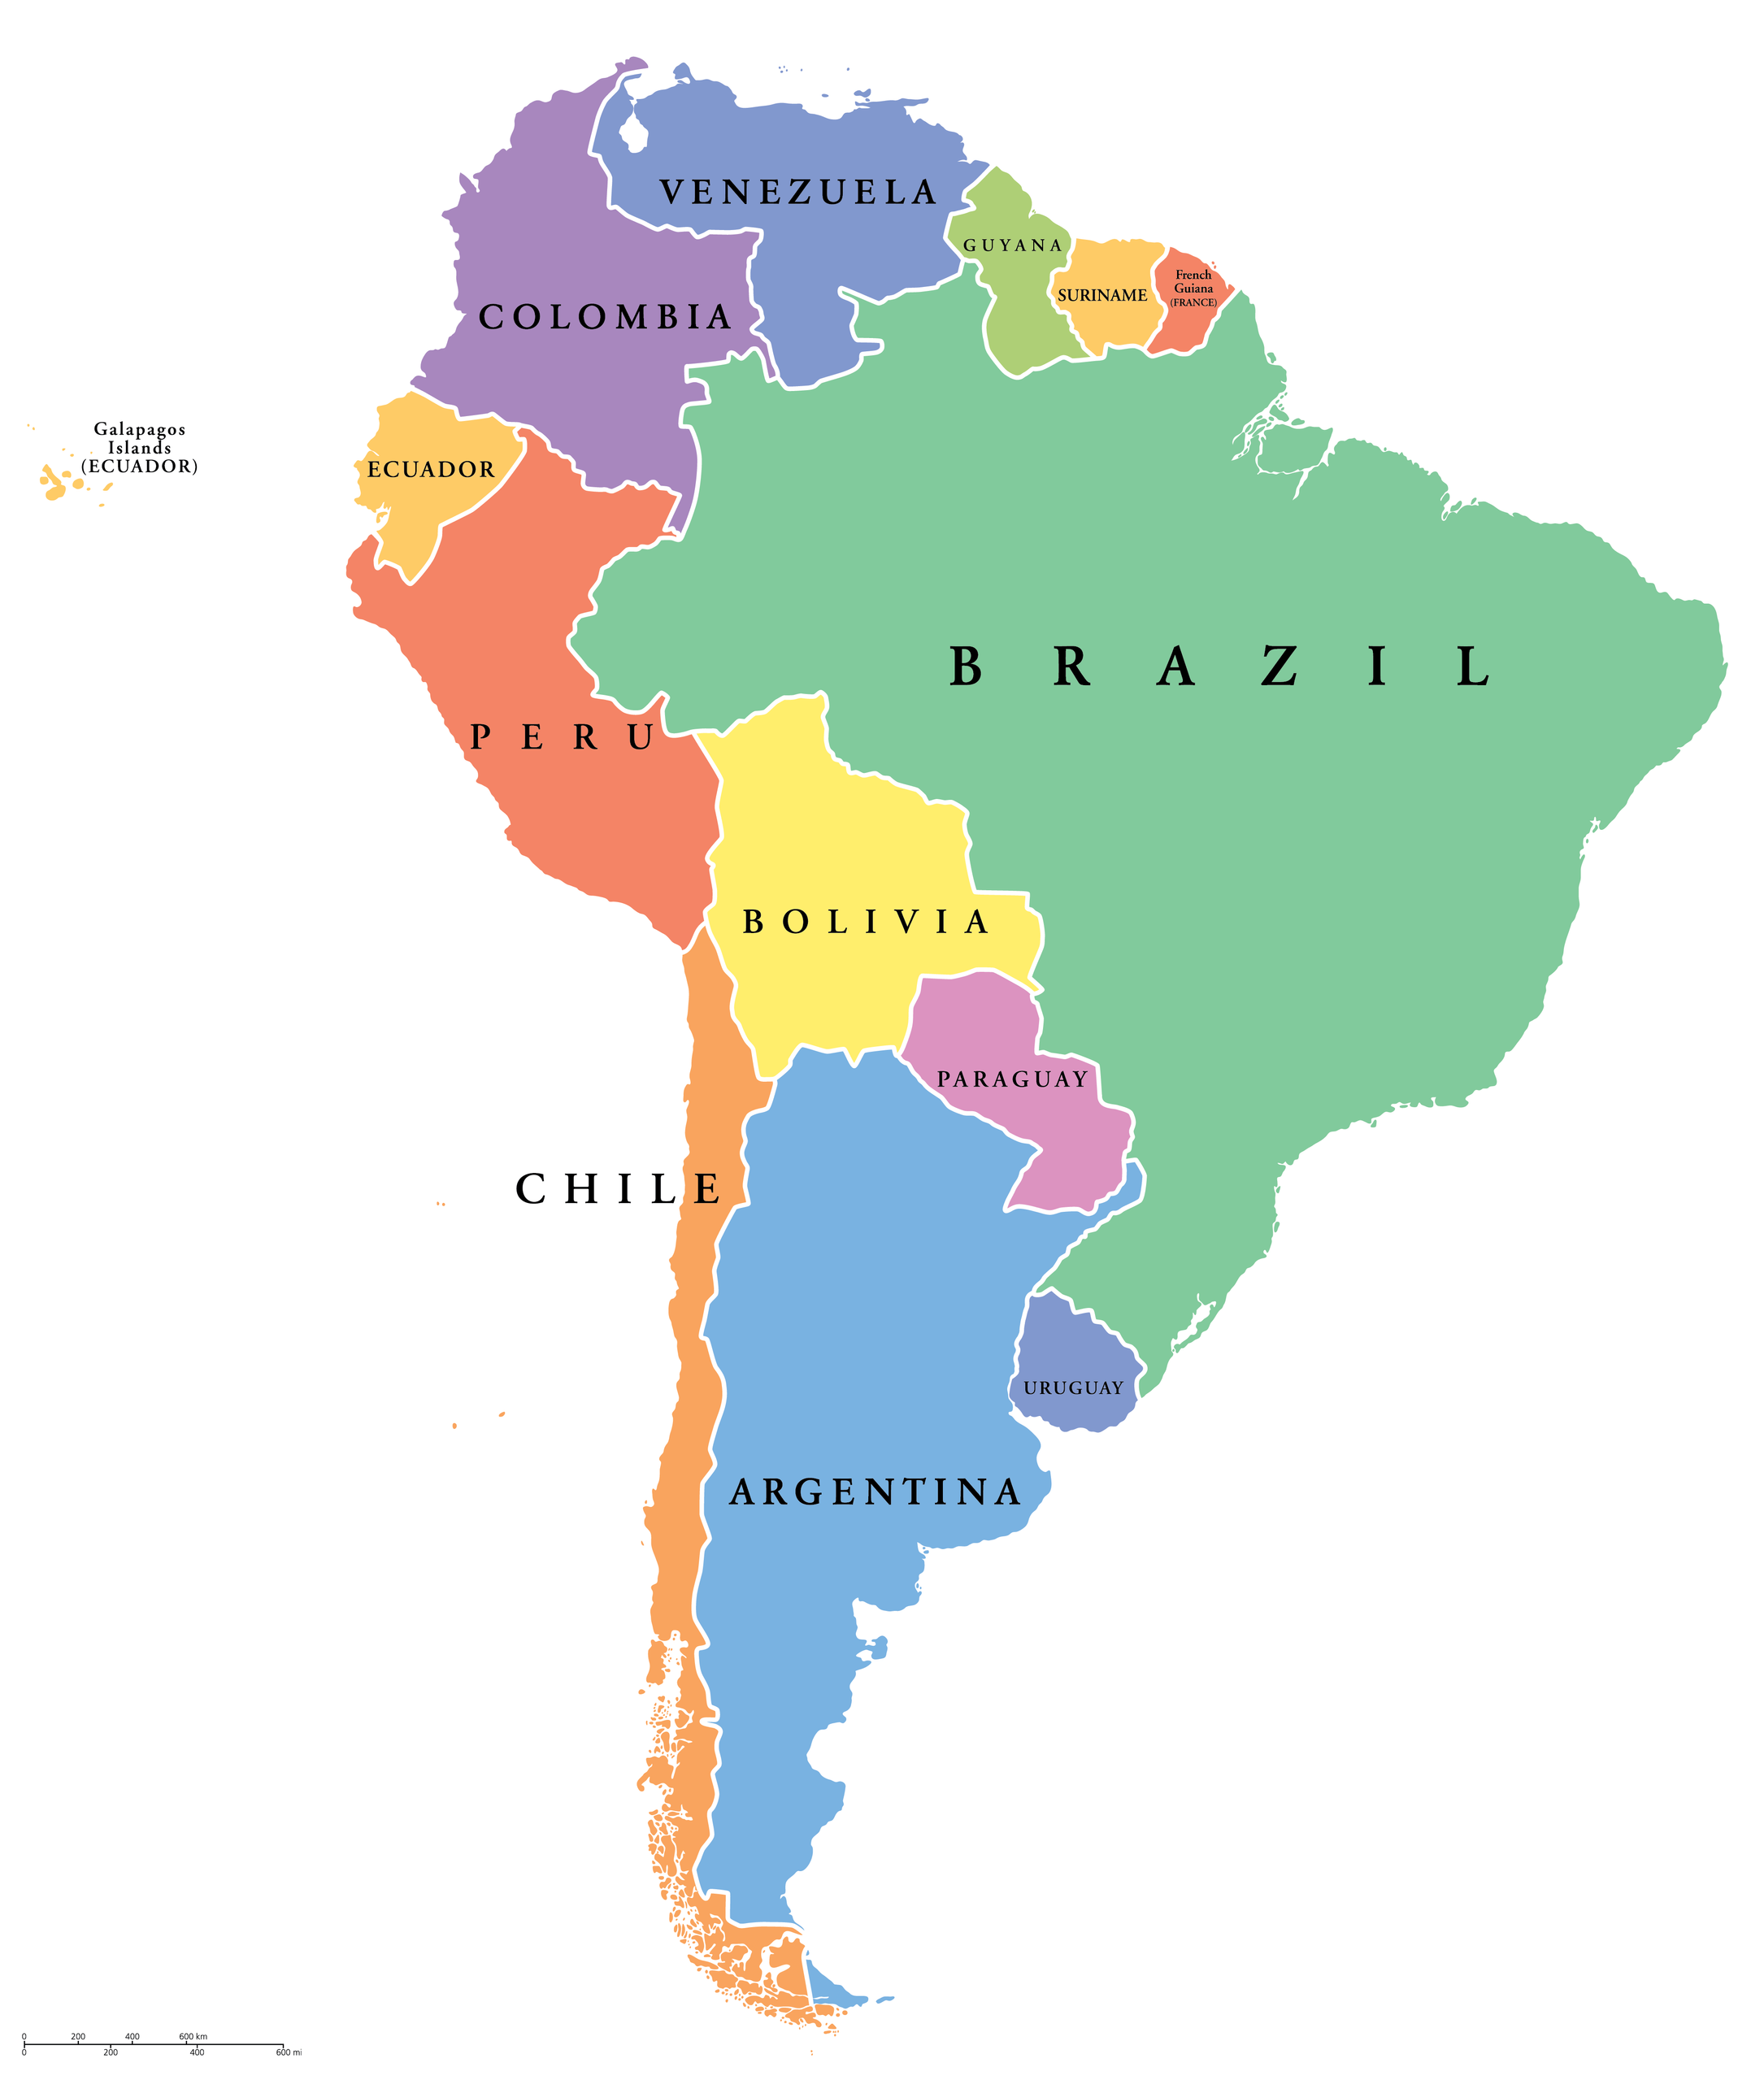 How Many Countries Are In South America? - WorldAtlas